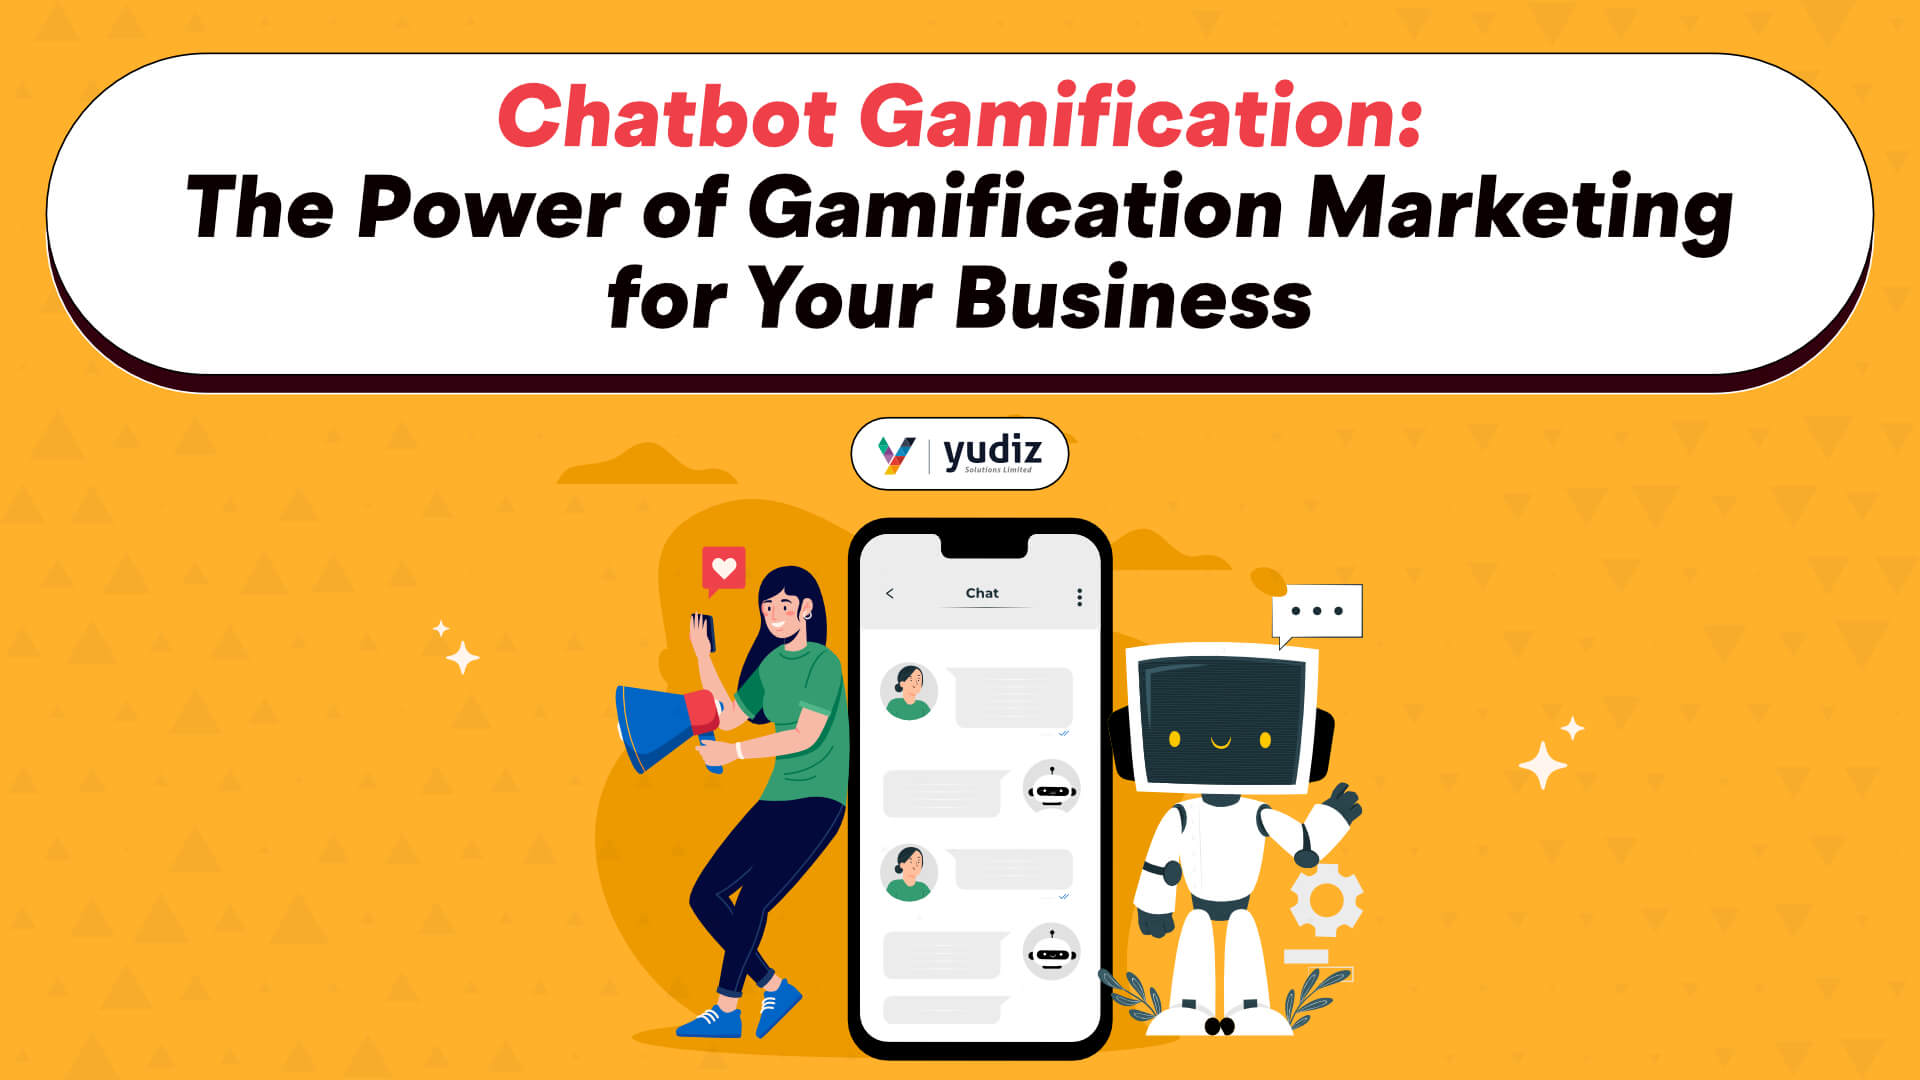 Chatbot gamification: The power of gamification marketing for your business